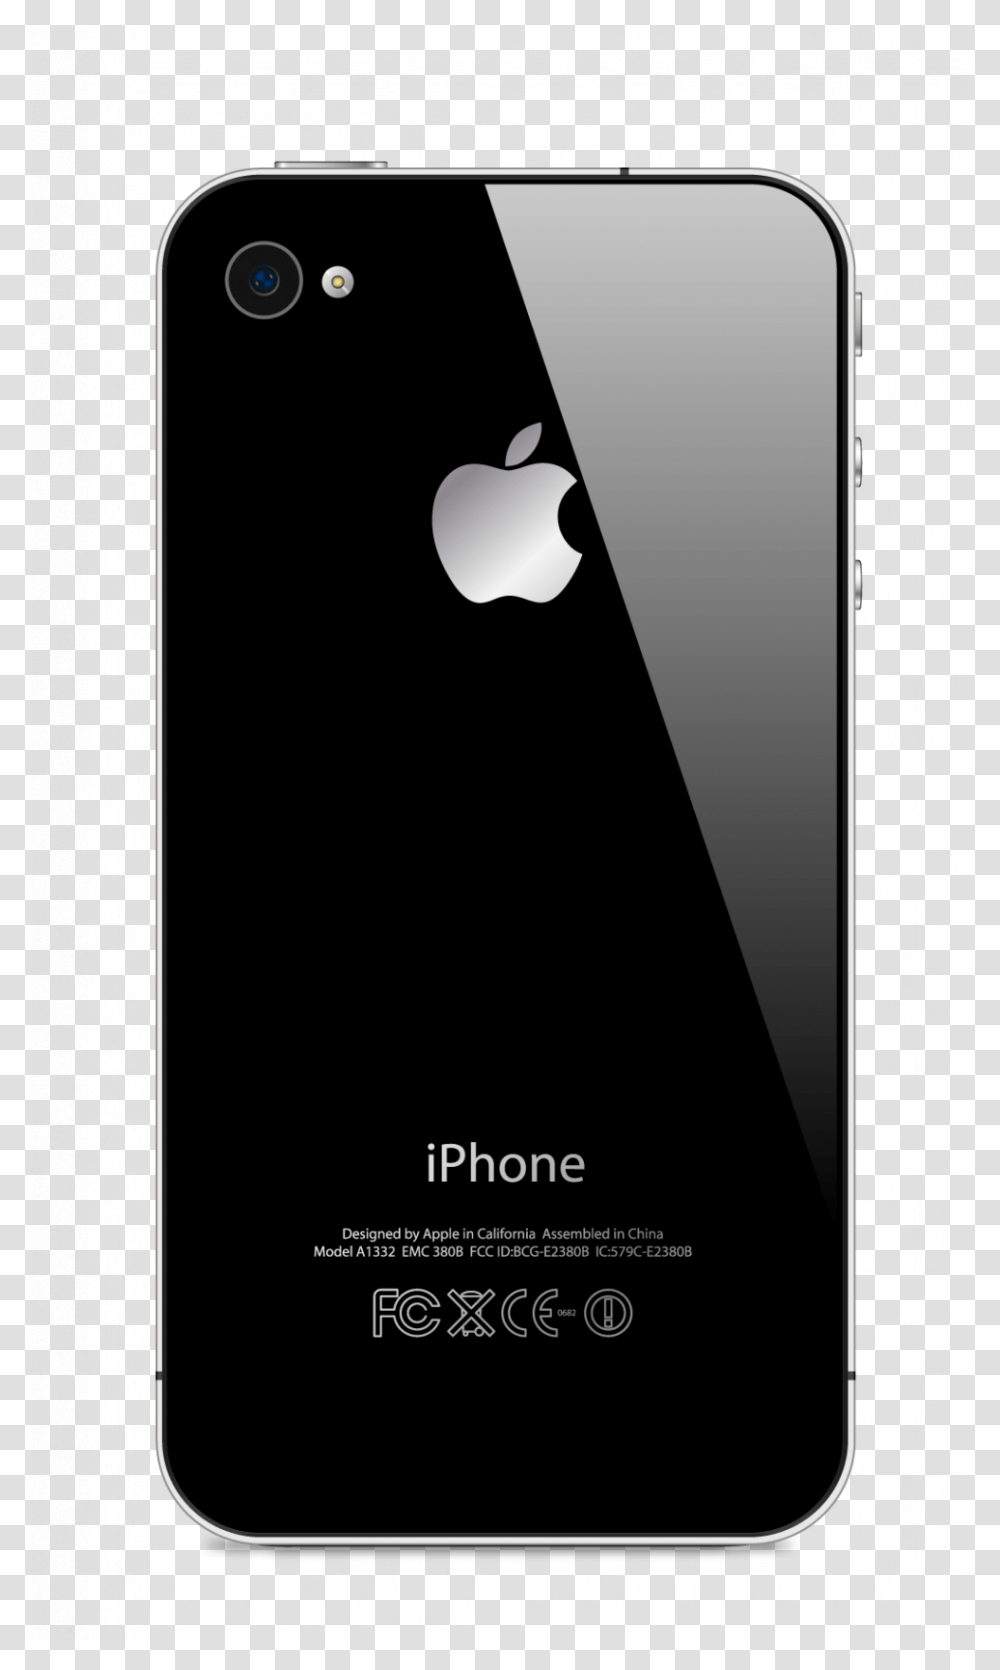 Apple Iphone Image - Lux Picsart I Phone, Mobile Phone, Electronics, Cell Phone Transparent Png